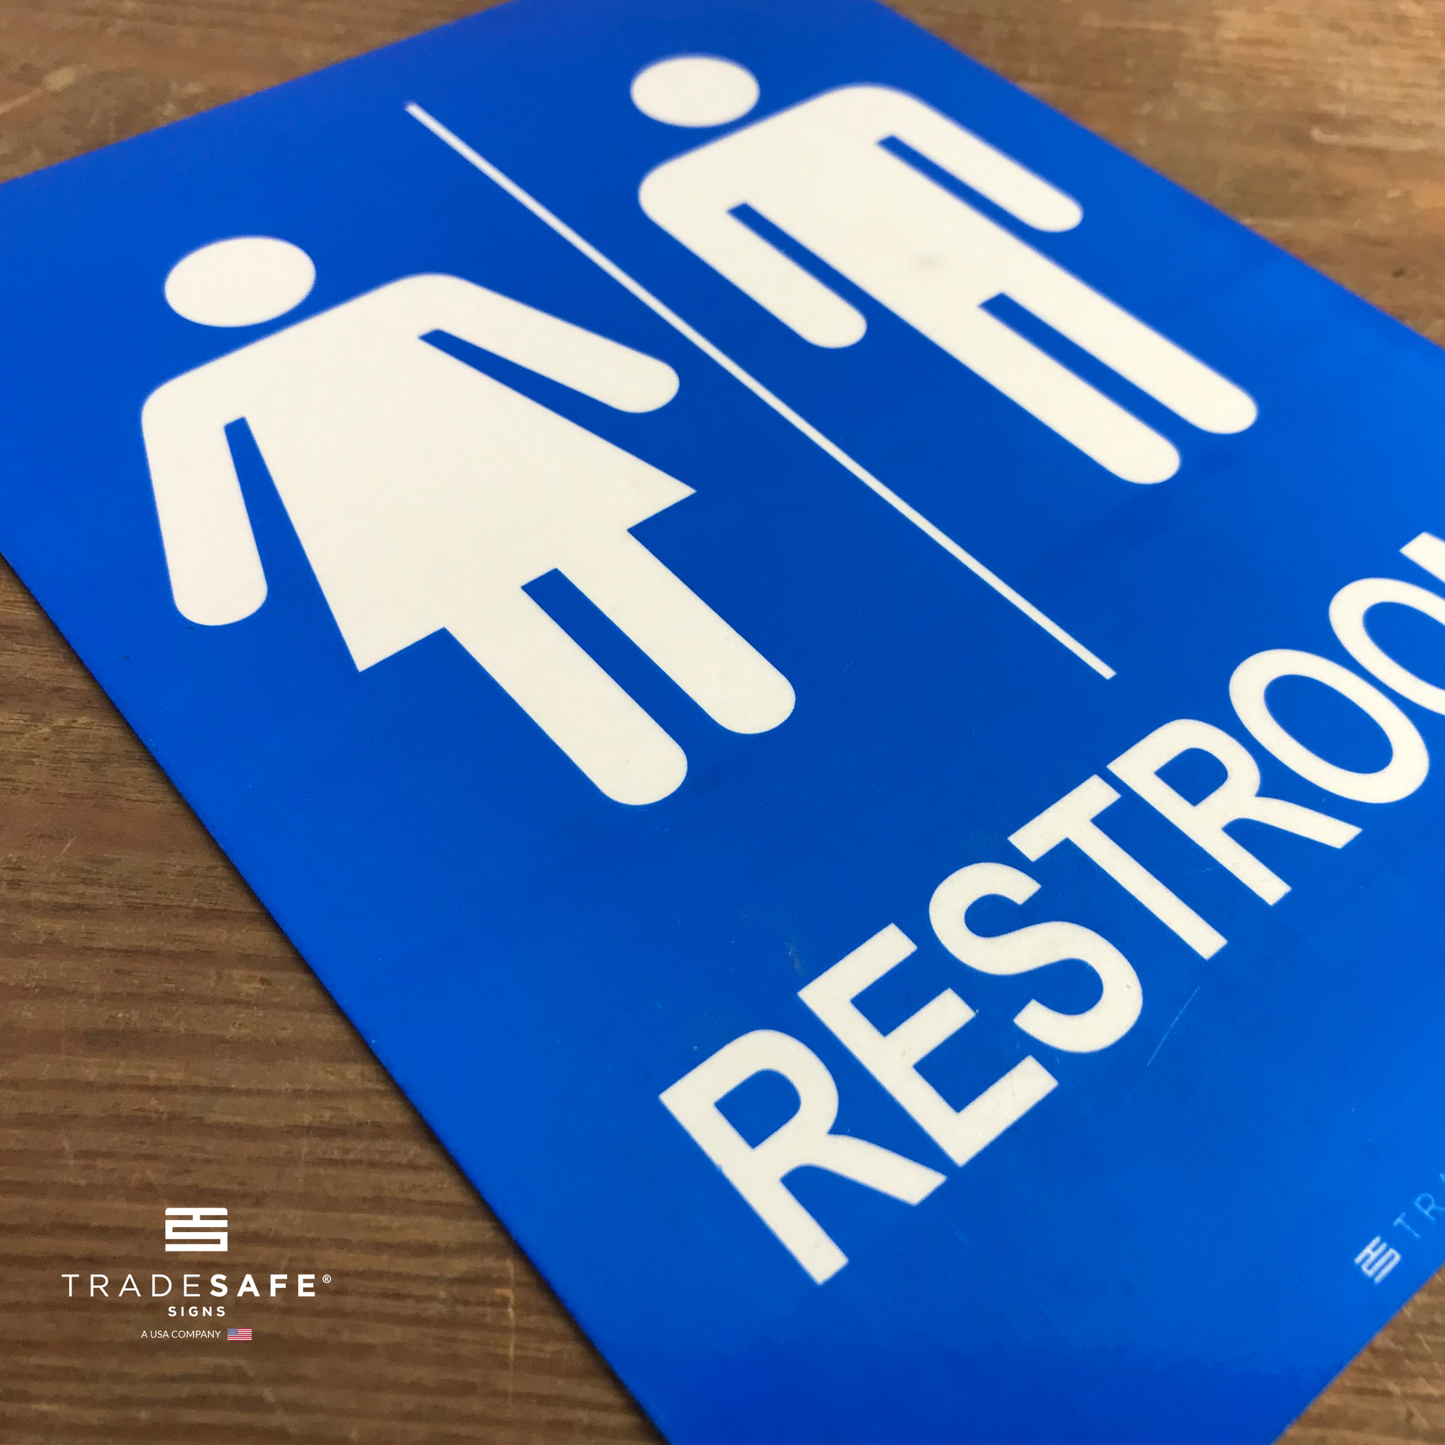 vibrant and highly visible unisex restroom sign